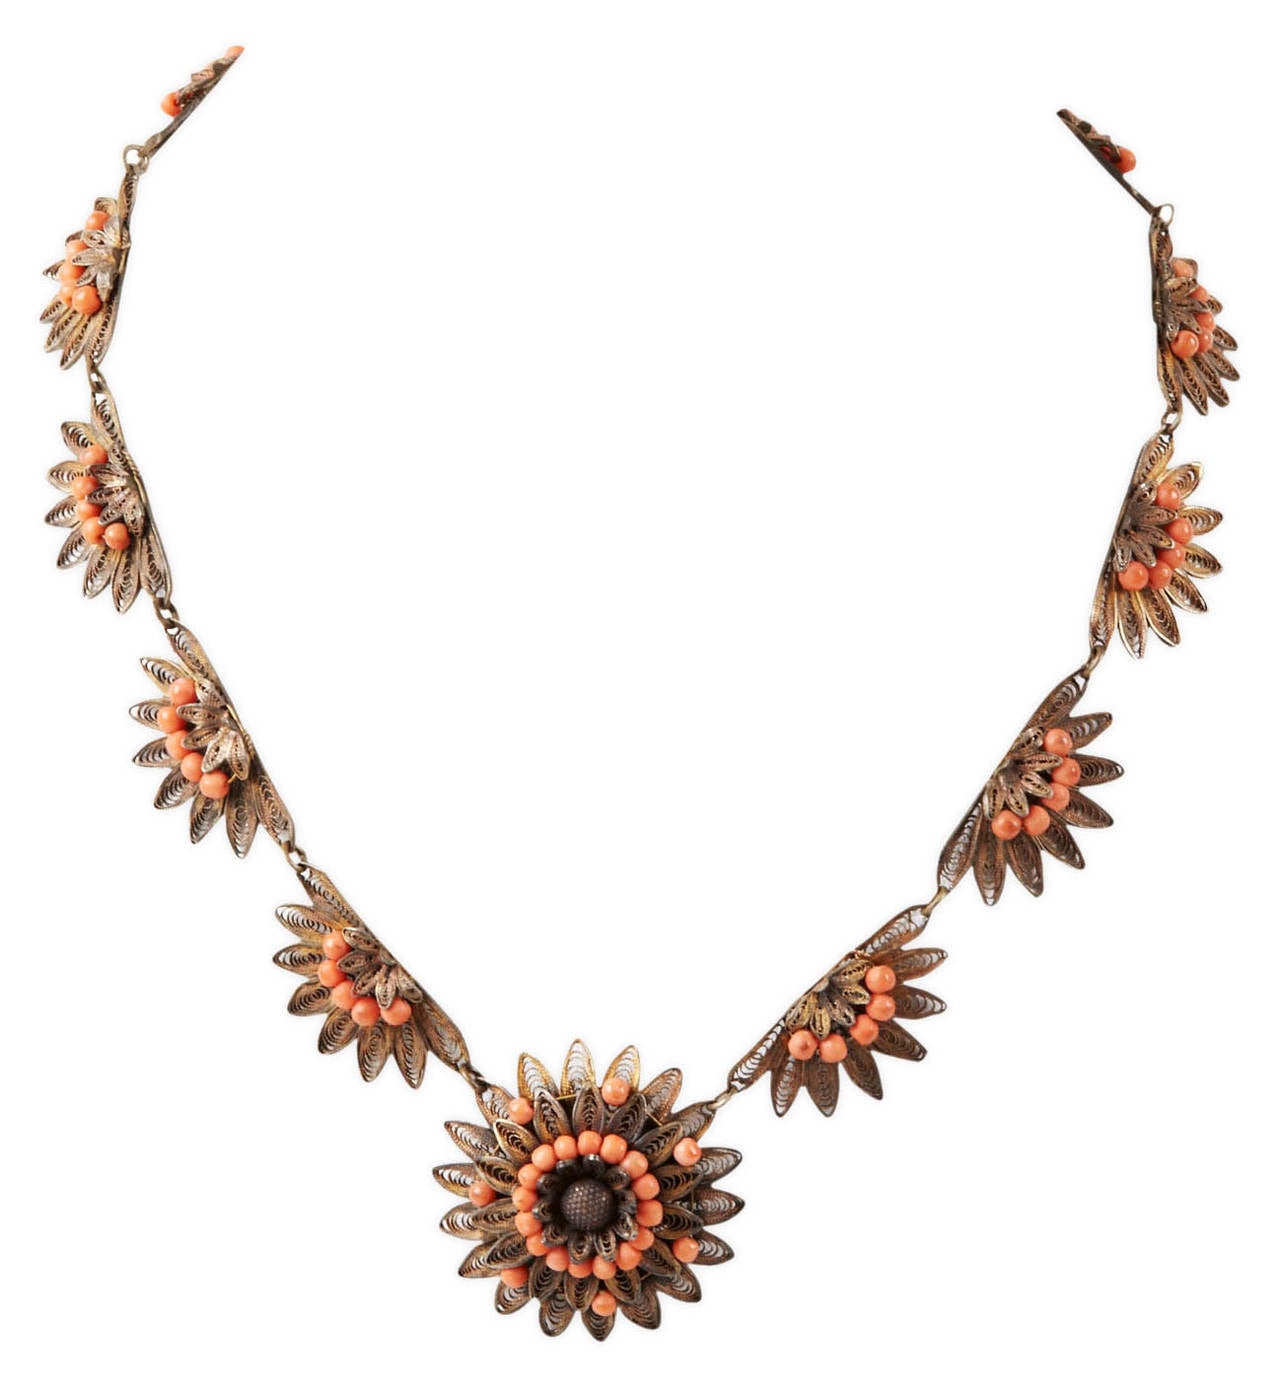 Silver Filigree and Coral Bead Floriform Necklace from the 1930's Italy. 
Excellent condition. Gilt Silver. 15